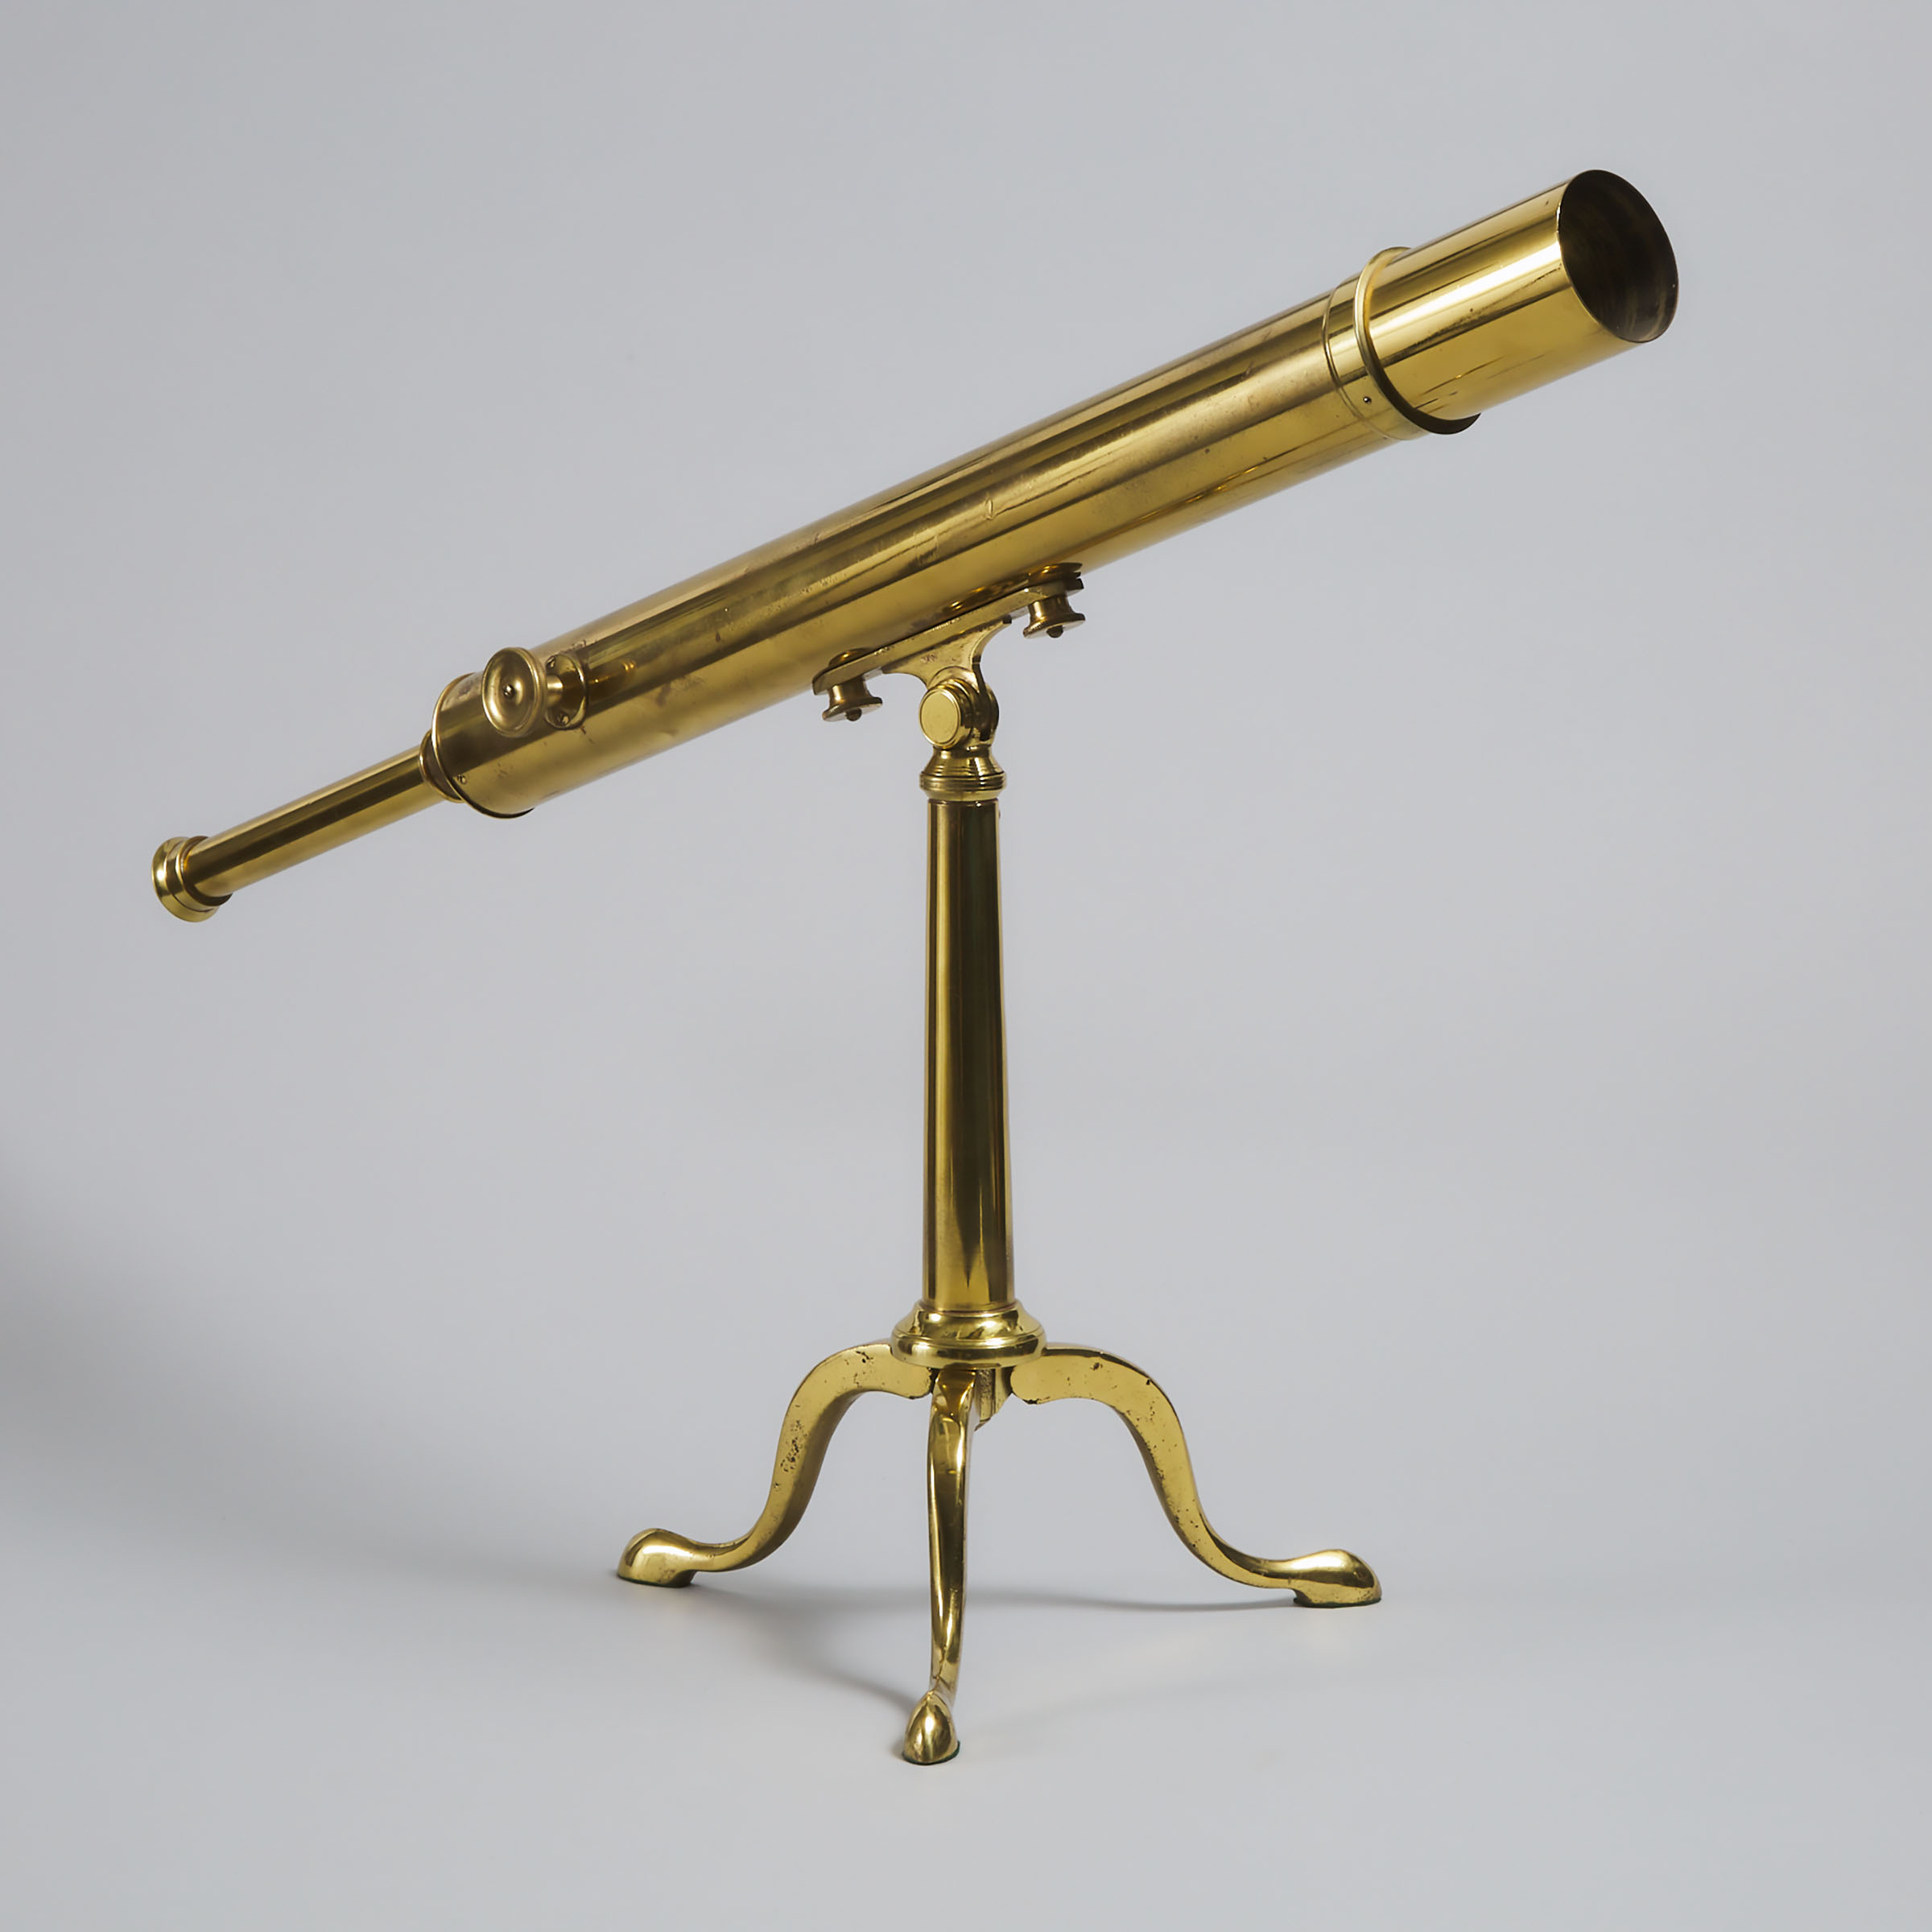 English Lacquered Brass Astronomical Library Telescope, Broadhurst Clarkson & Co., London, 19th/early 20th century